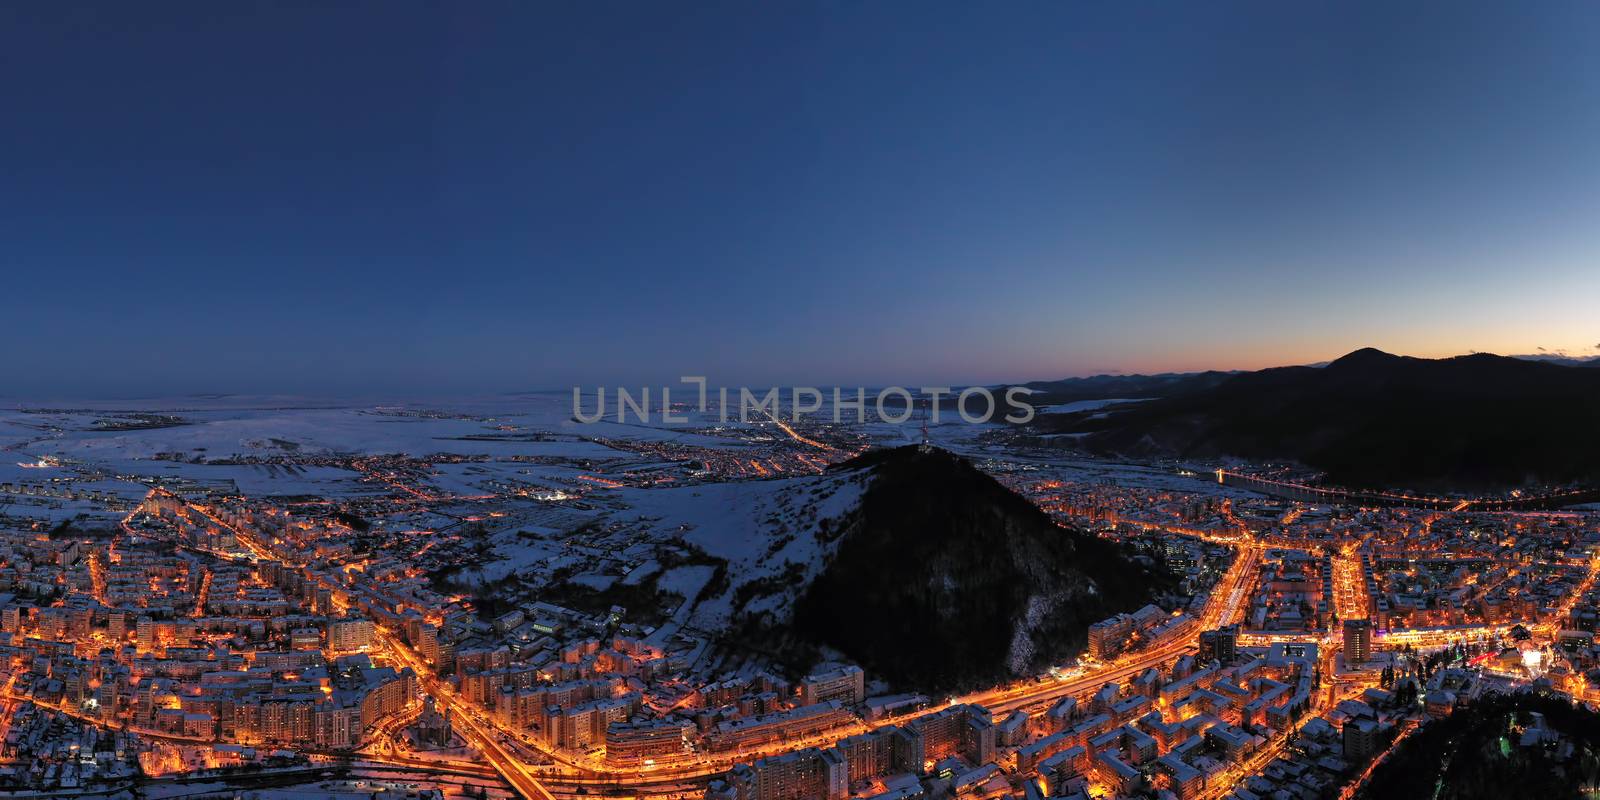 Drone view of night city lights and the mountains behind, Aerial landscape of Piatra Neamt in Romania, winter scene.